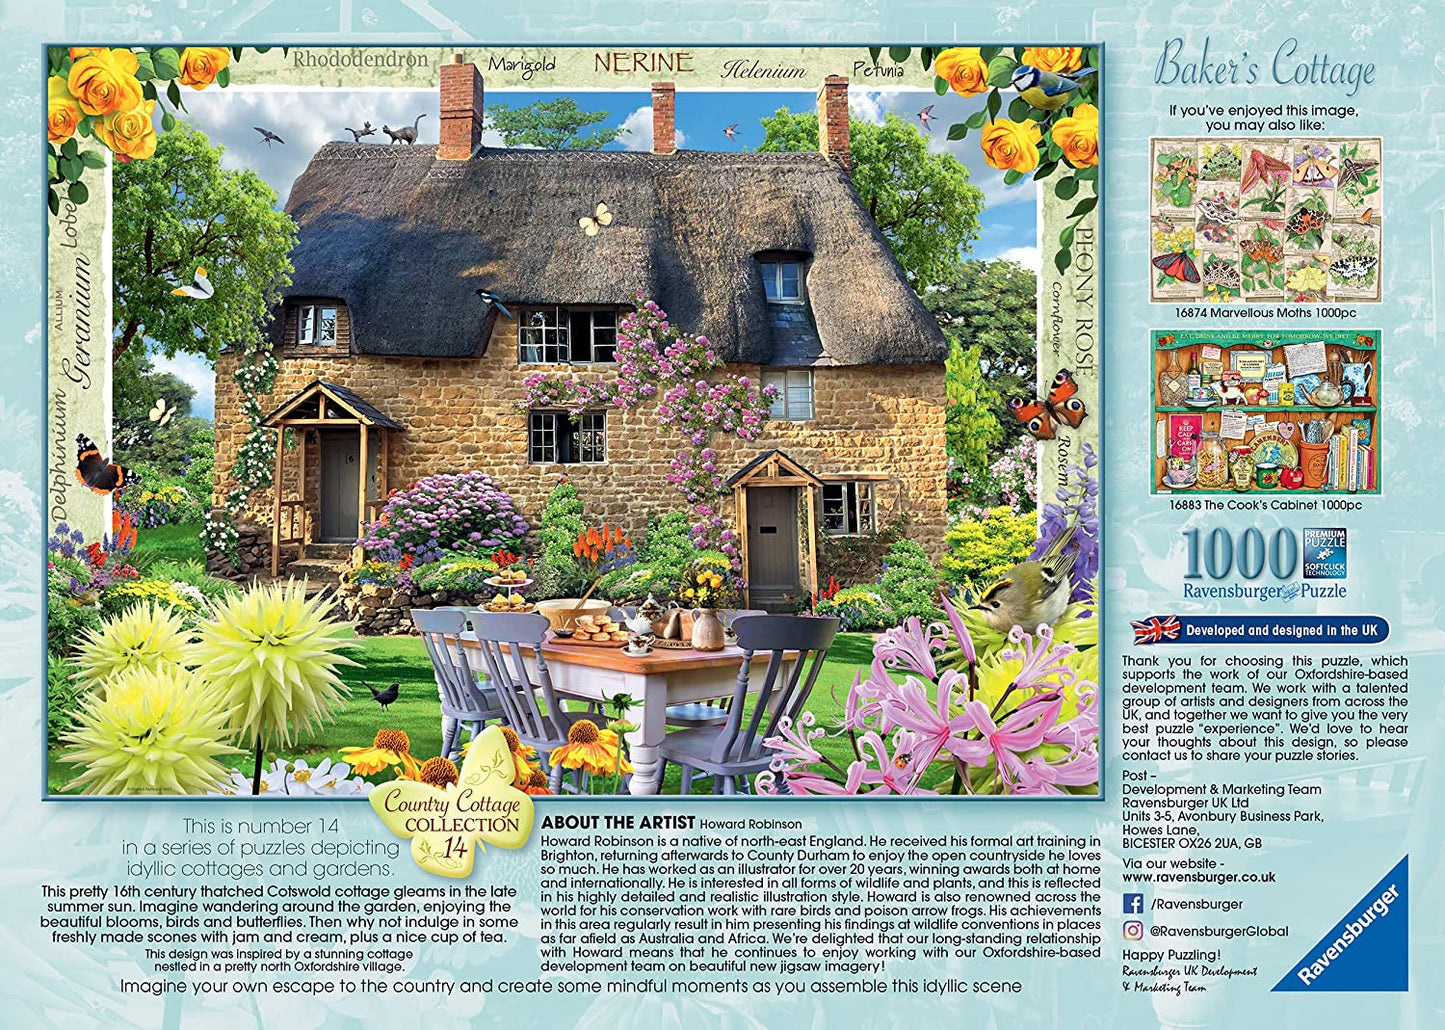 Ravensburger - Country Cottage Collection - Baker's Cottage - 1000 Piece Jigsaw Puzzle